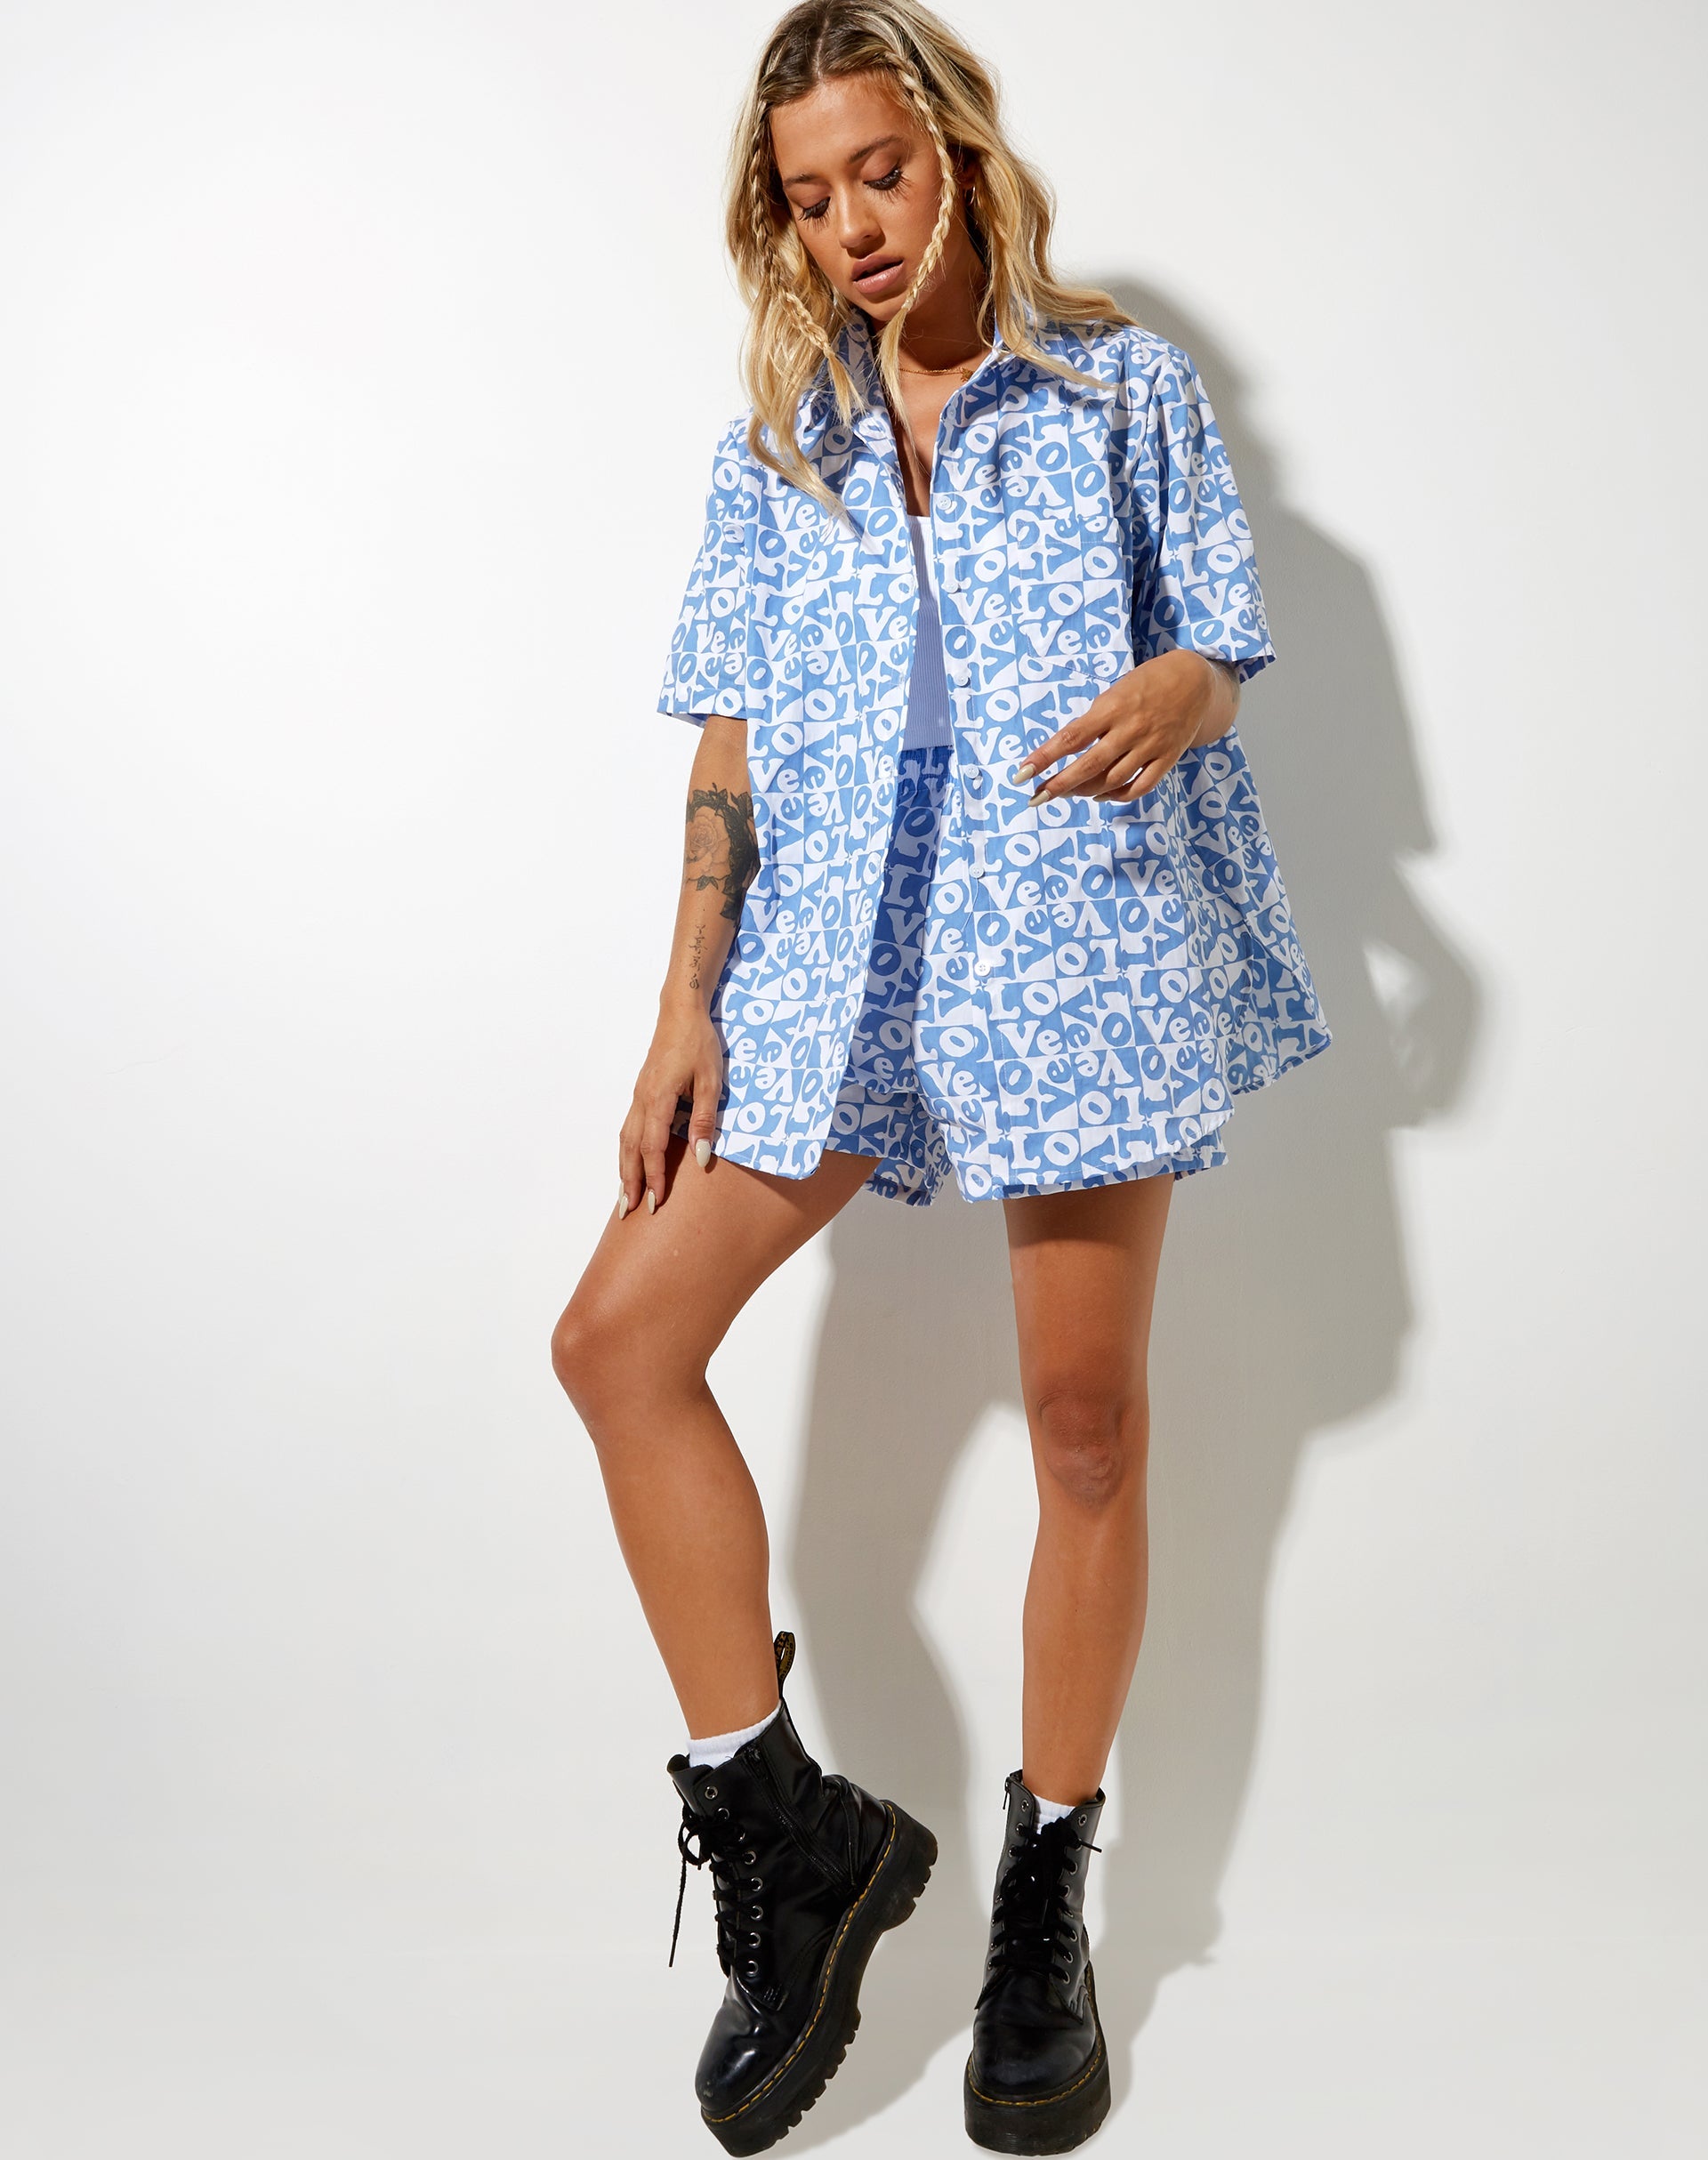 Image of Smith Short Sleeve Shirt in Love Checker Blue